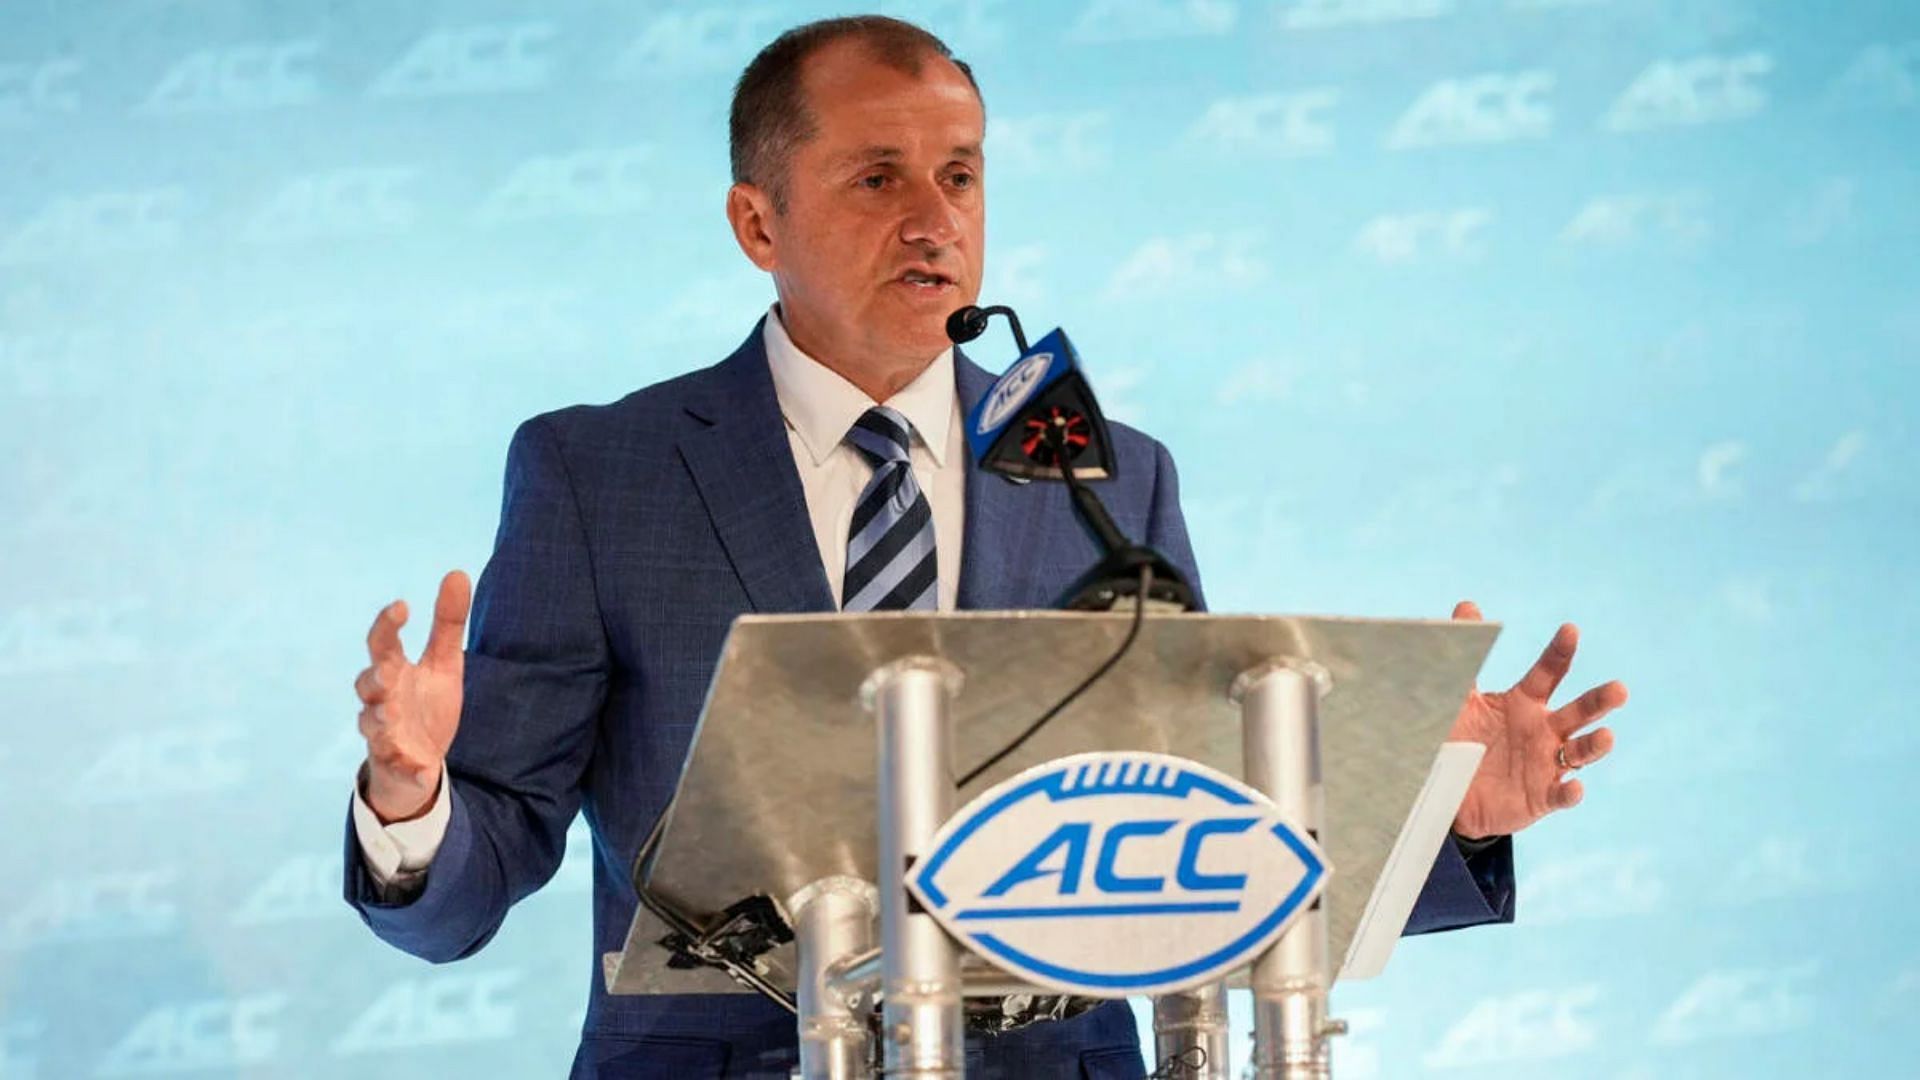 Jim Phillips needs to figure out the ACC expansion to get the conference more money